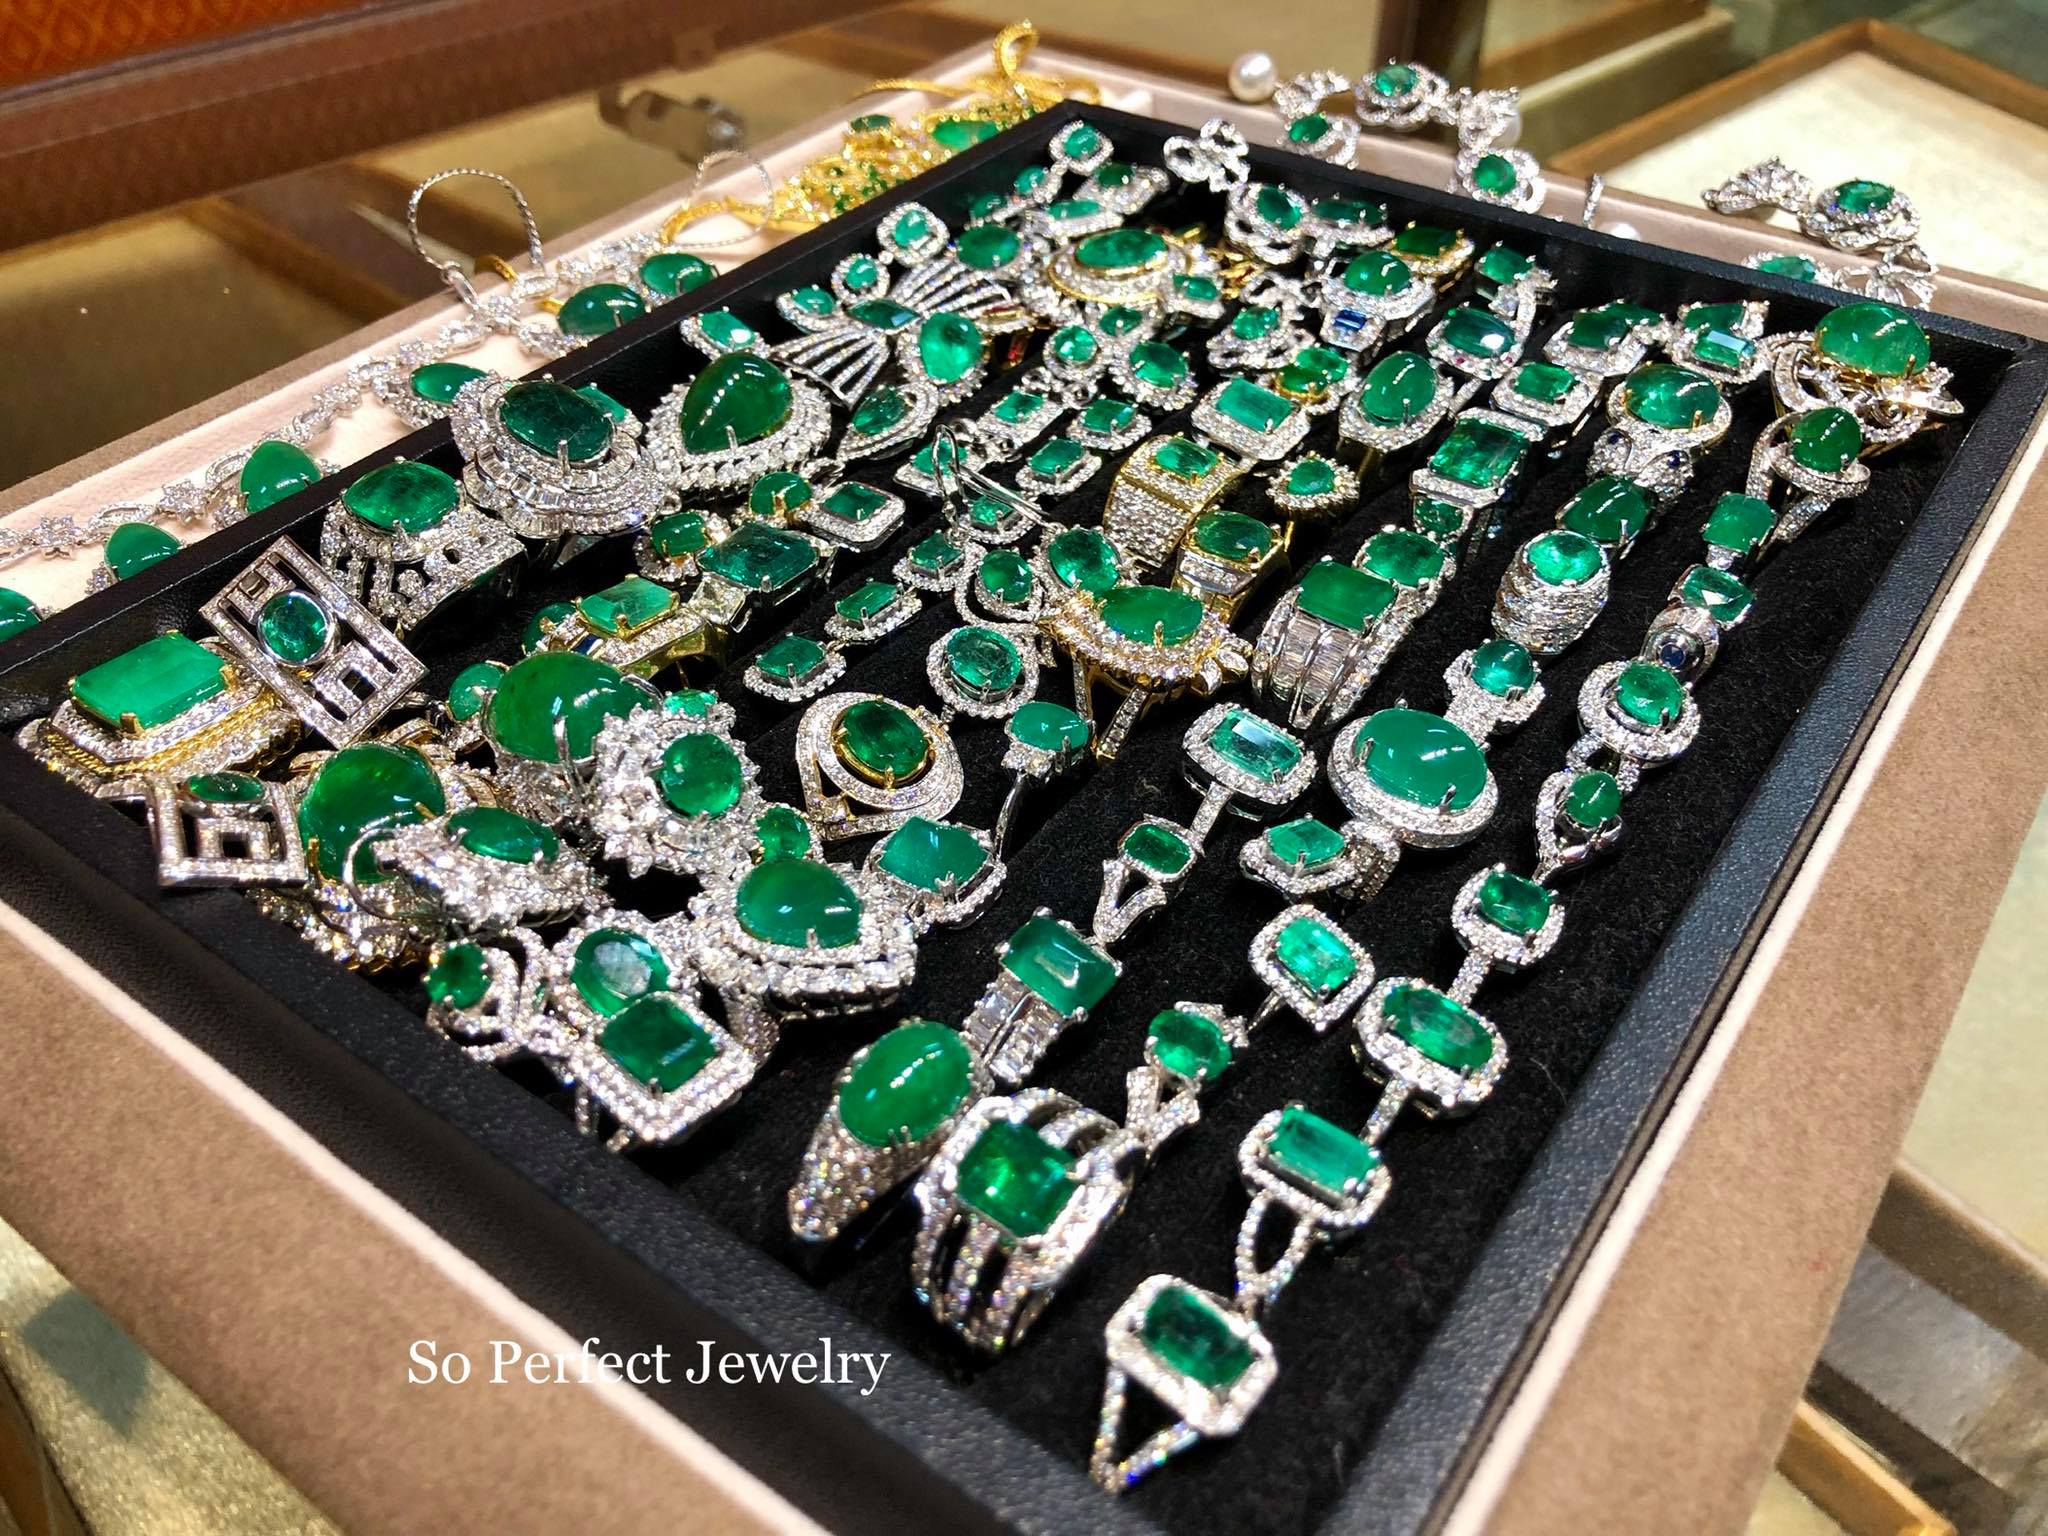 Emerald Green With Envy!